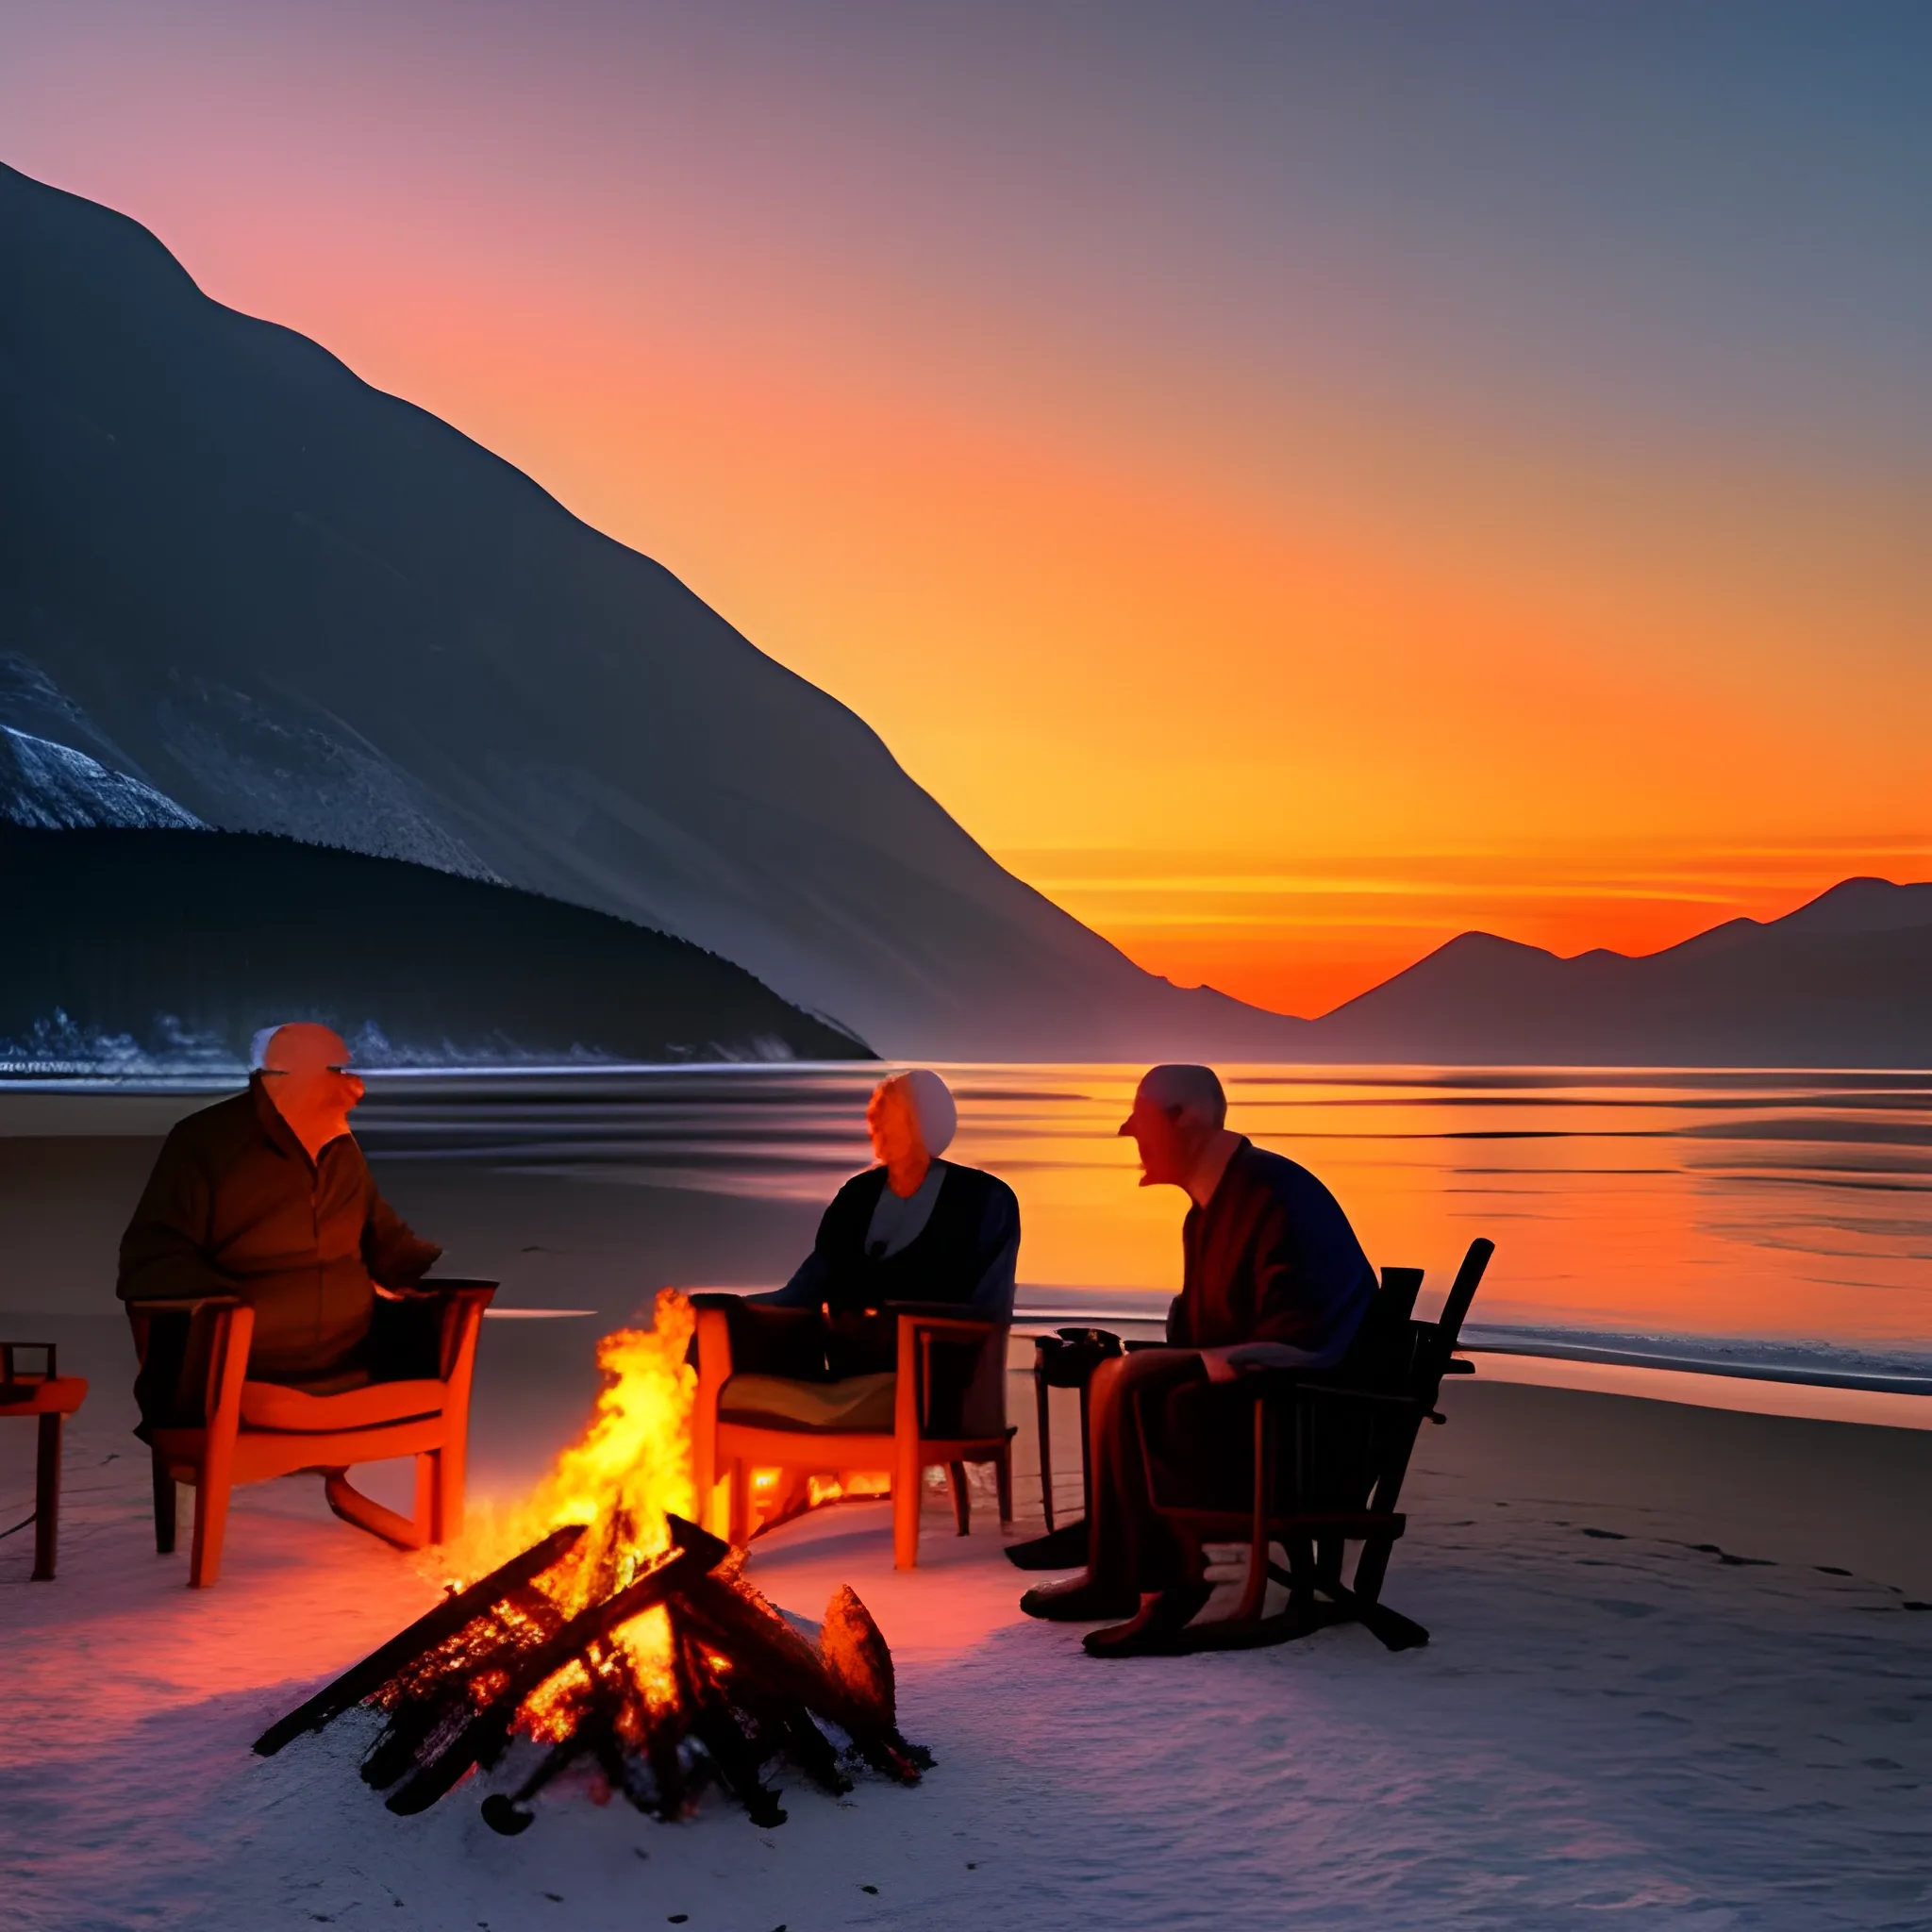 a girl and an old wise man are sitting by the fire talking about freedom on the seashore next to the mountains at sunset